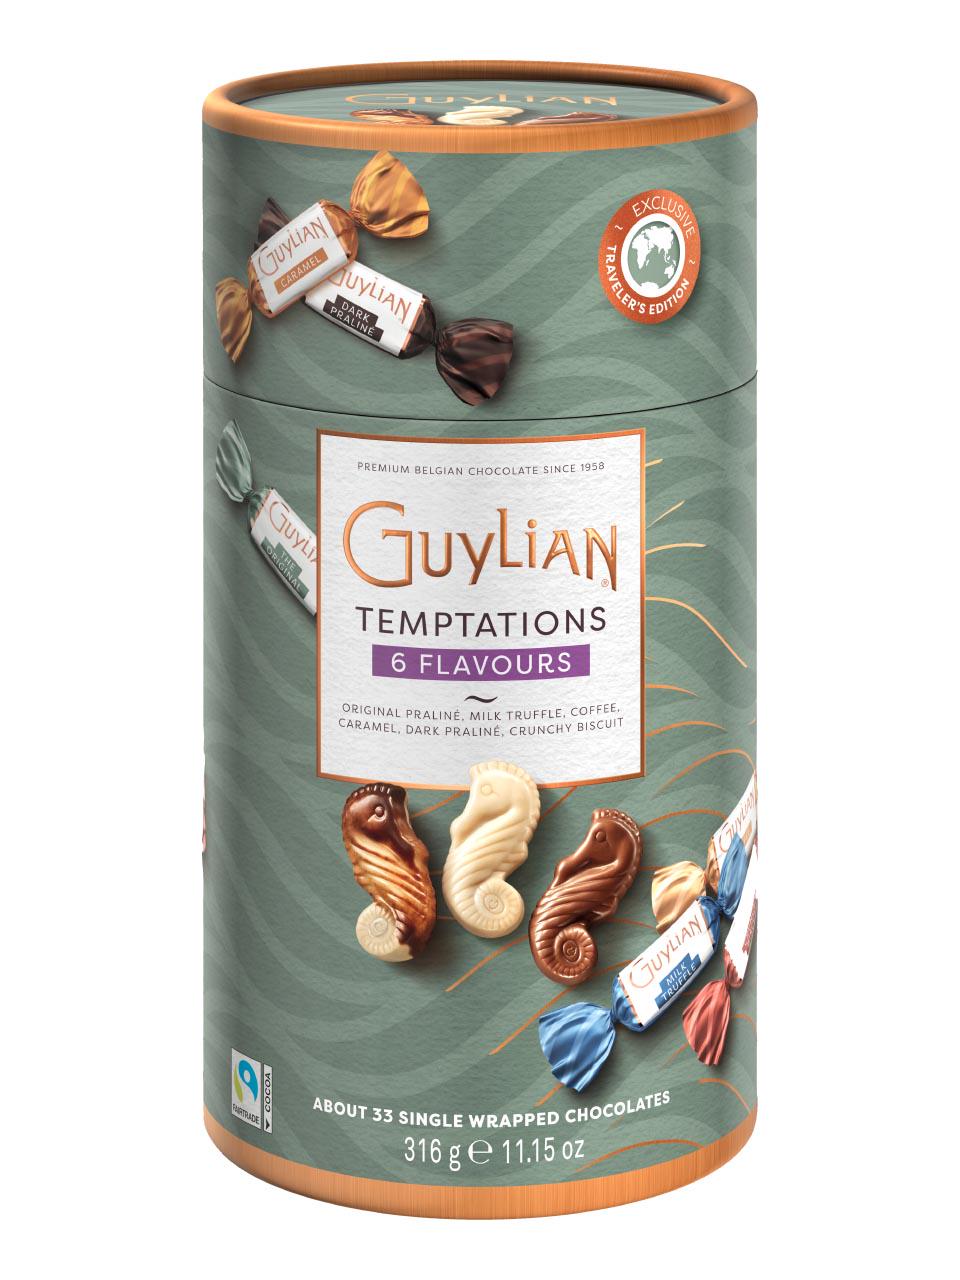 Buy Guylian Master Selection 185g online at a great price